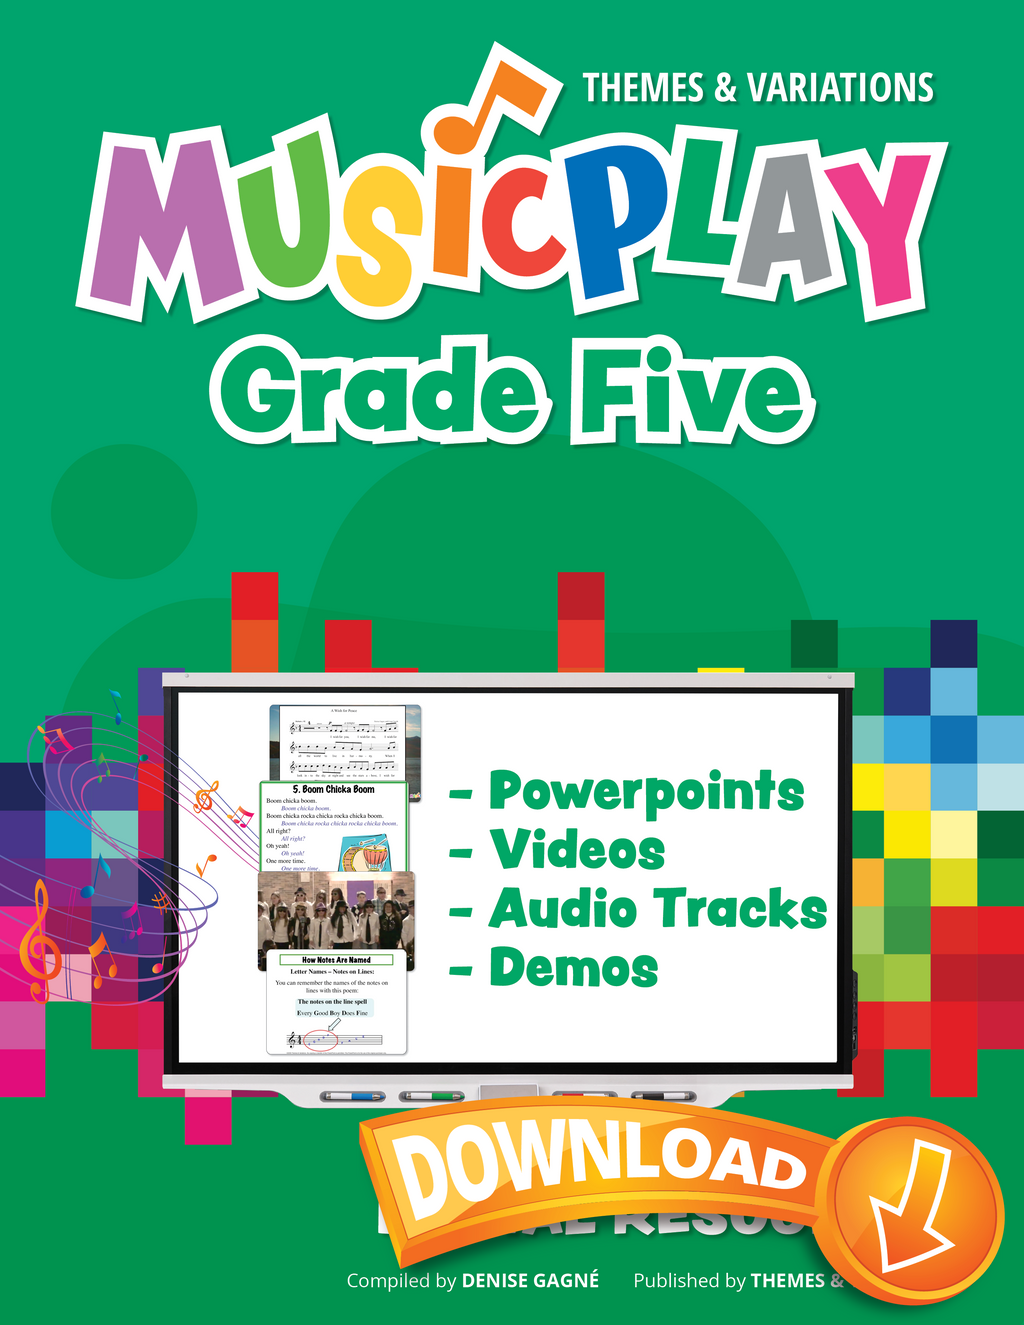 Musicplay Grade 5 Digital Resources Download Cover